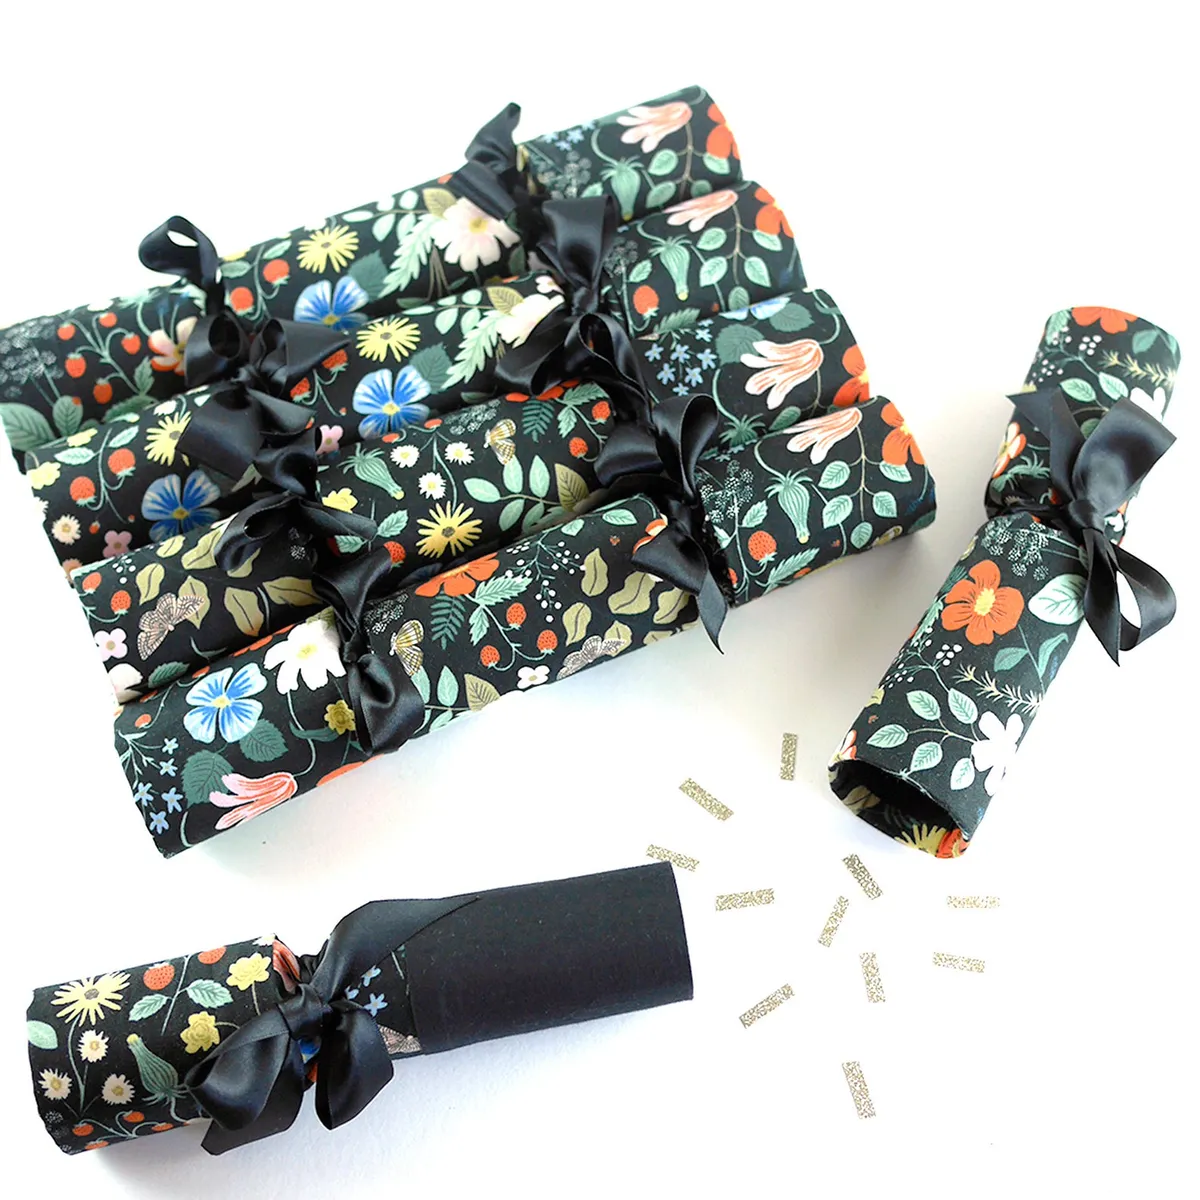 Christmas sewing projects – Christmas crackers